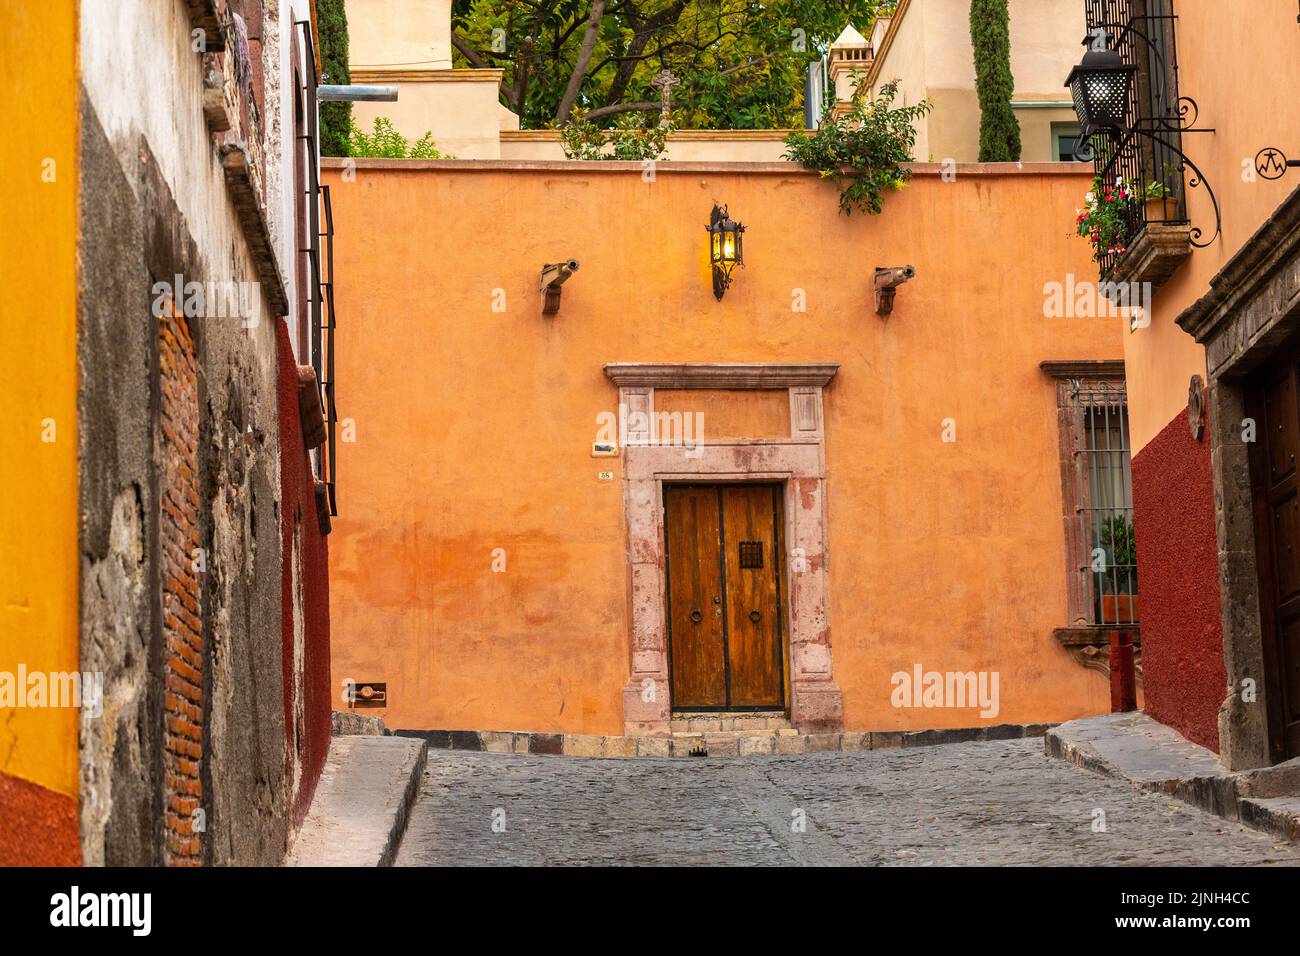 A Mexican style wooden door and colorful facade on a Spanish colonial house on Calle Barranca in the historic city center of San Miguel de Allende, Mexico. Stock Photo